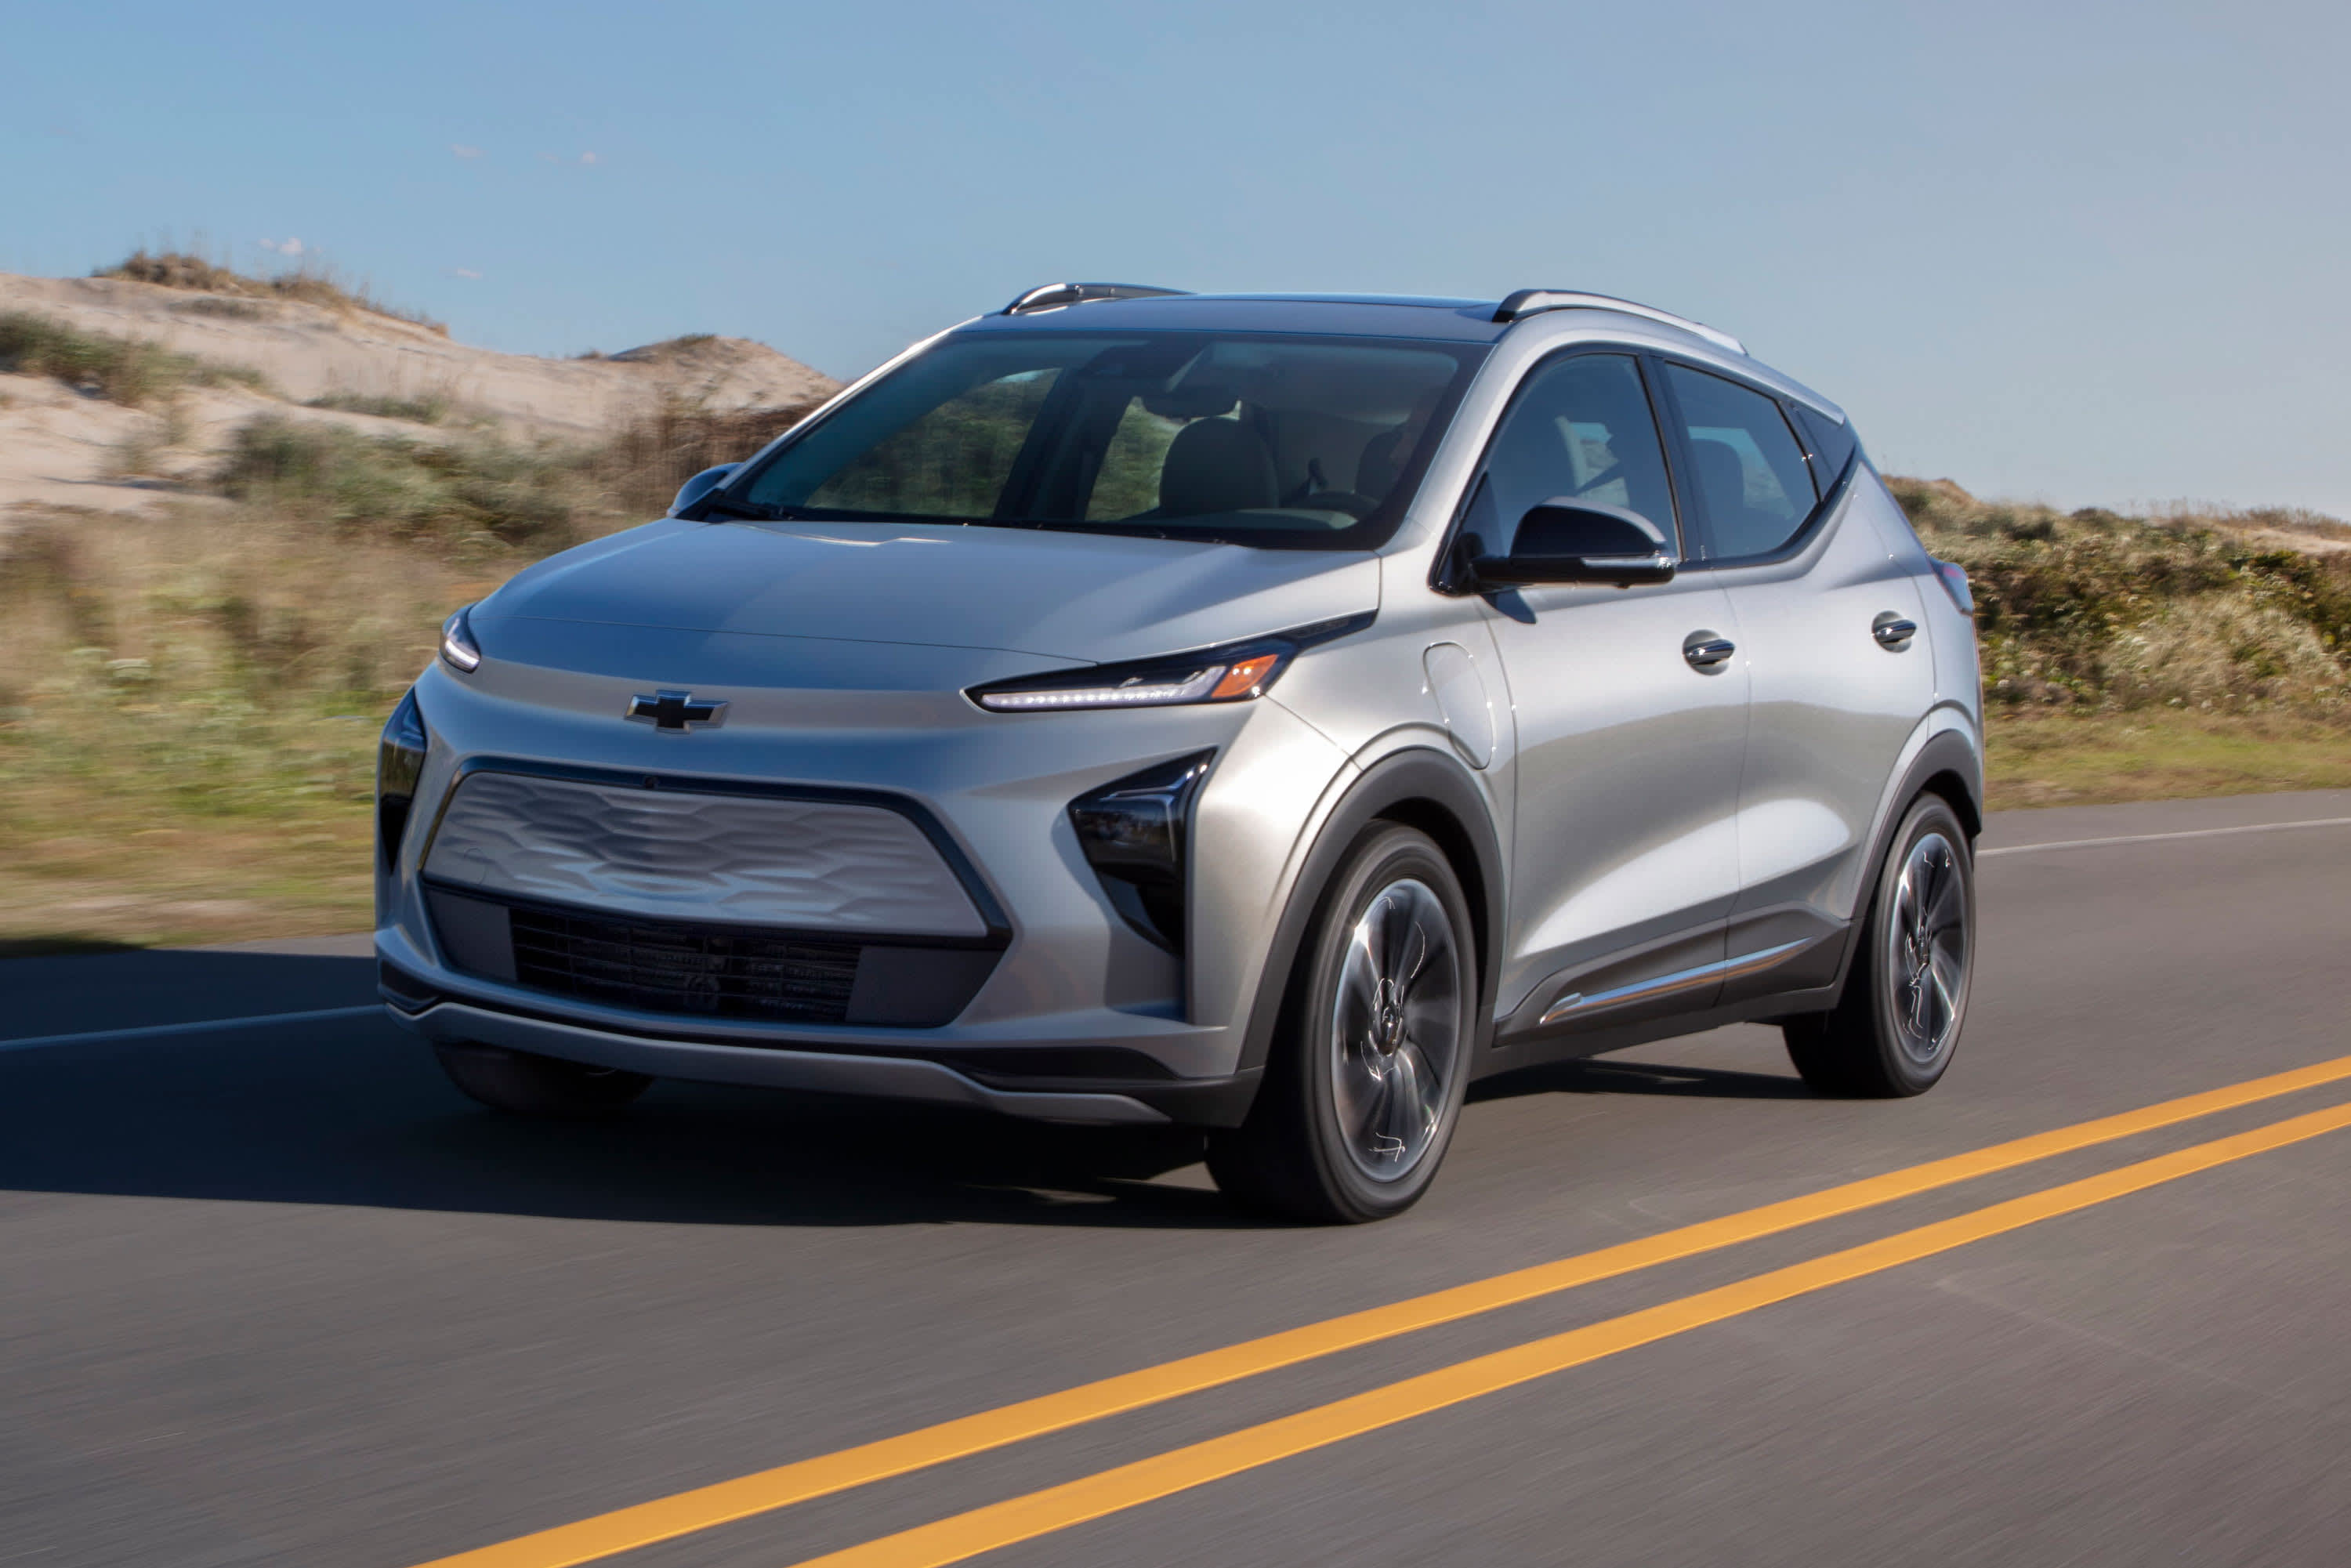 GM’s EV plans begin to take shape with the new low-priced Chevy Bolts